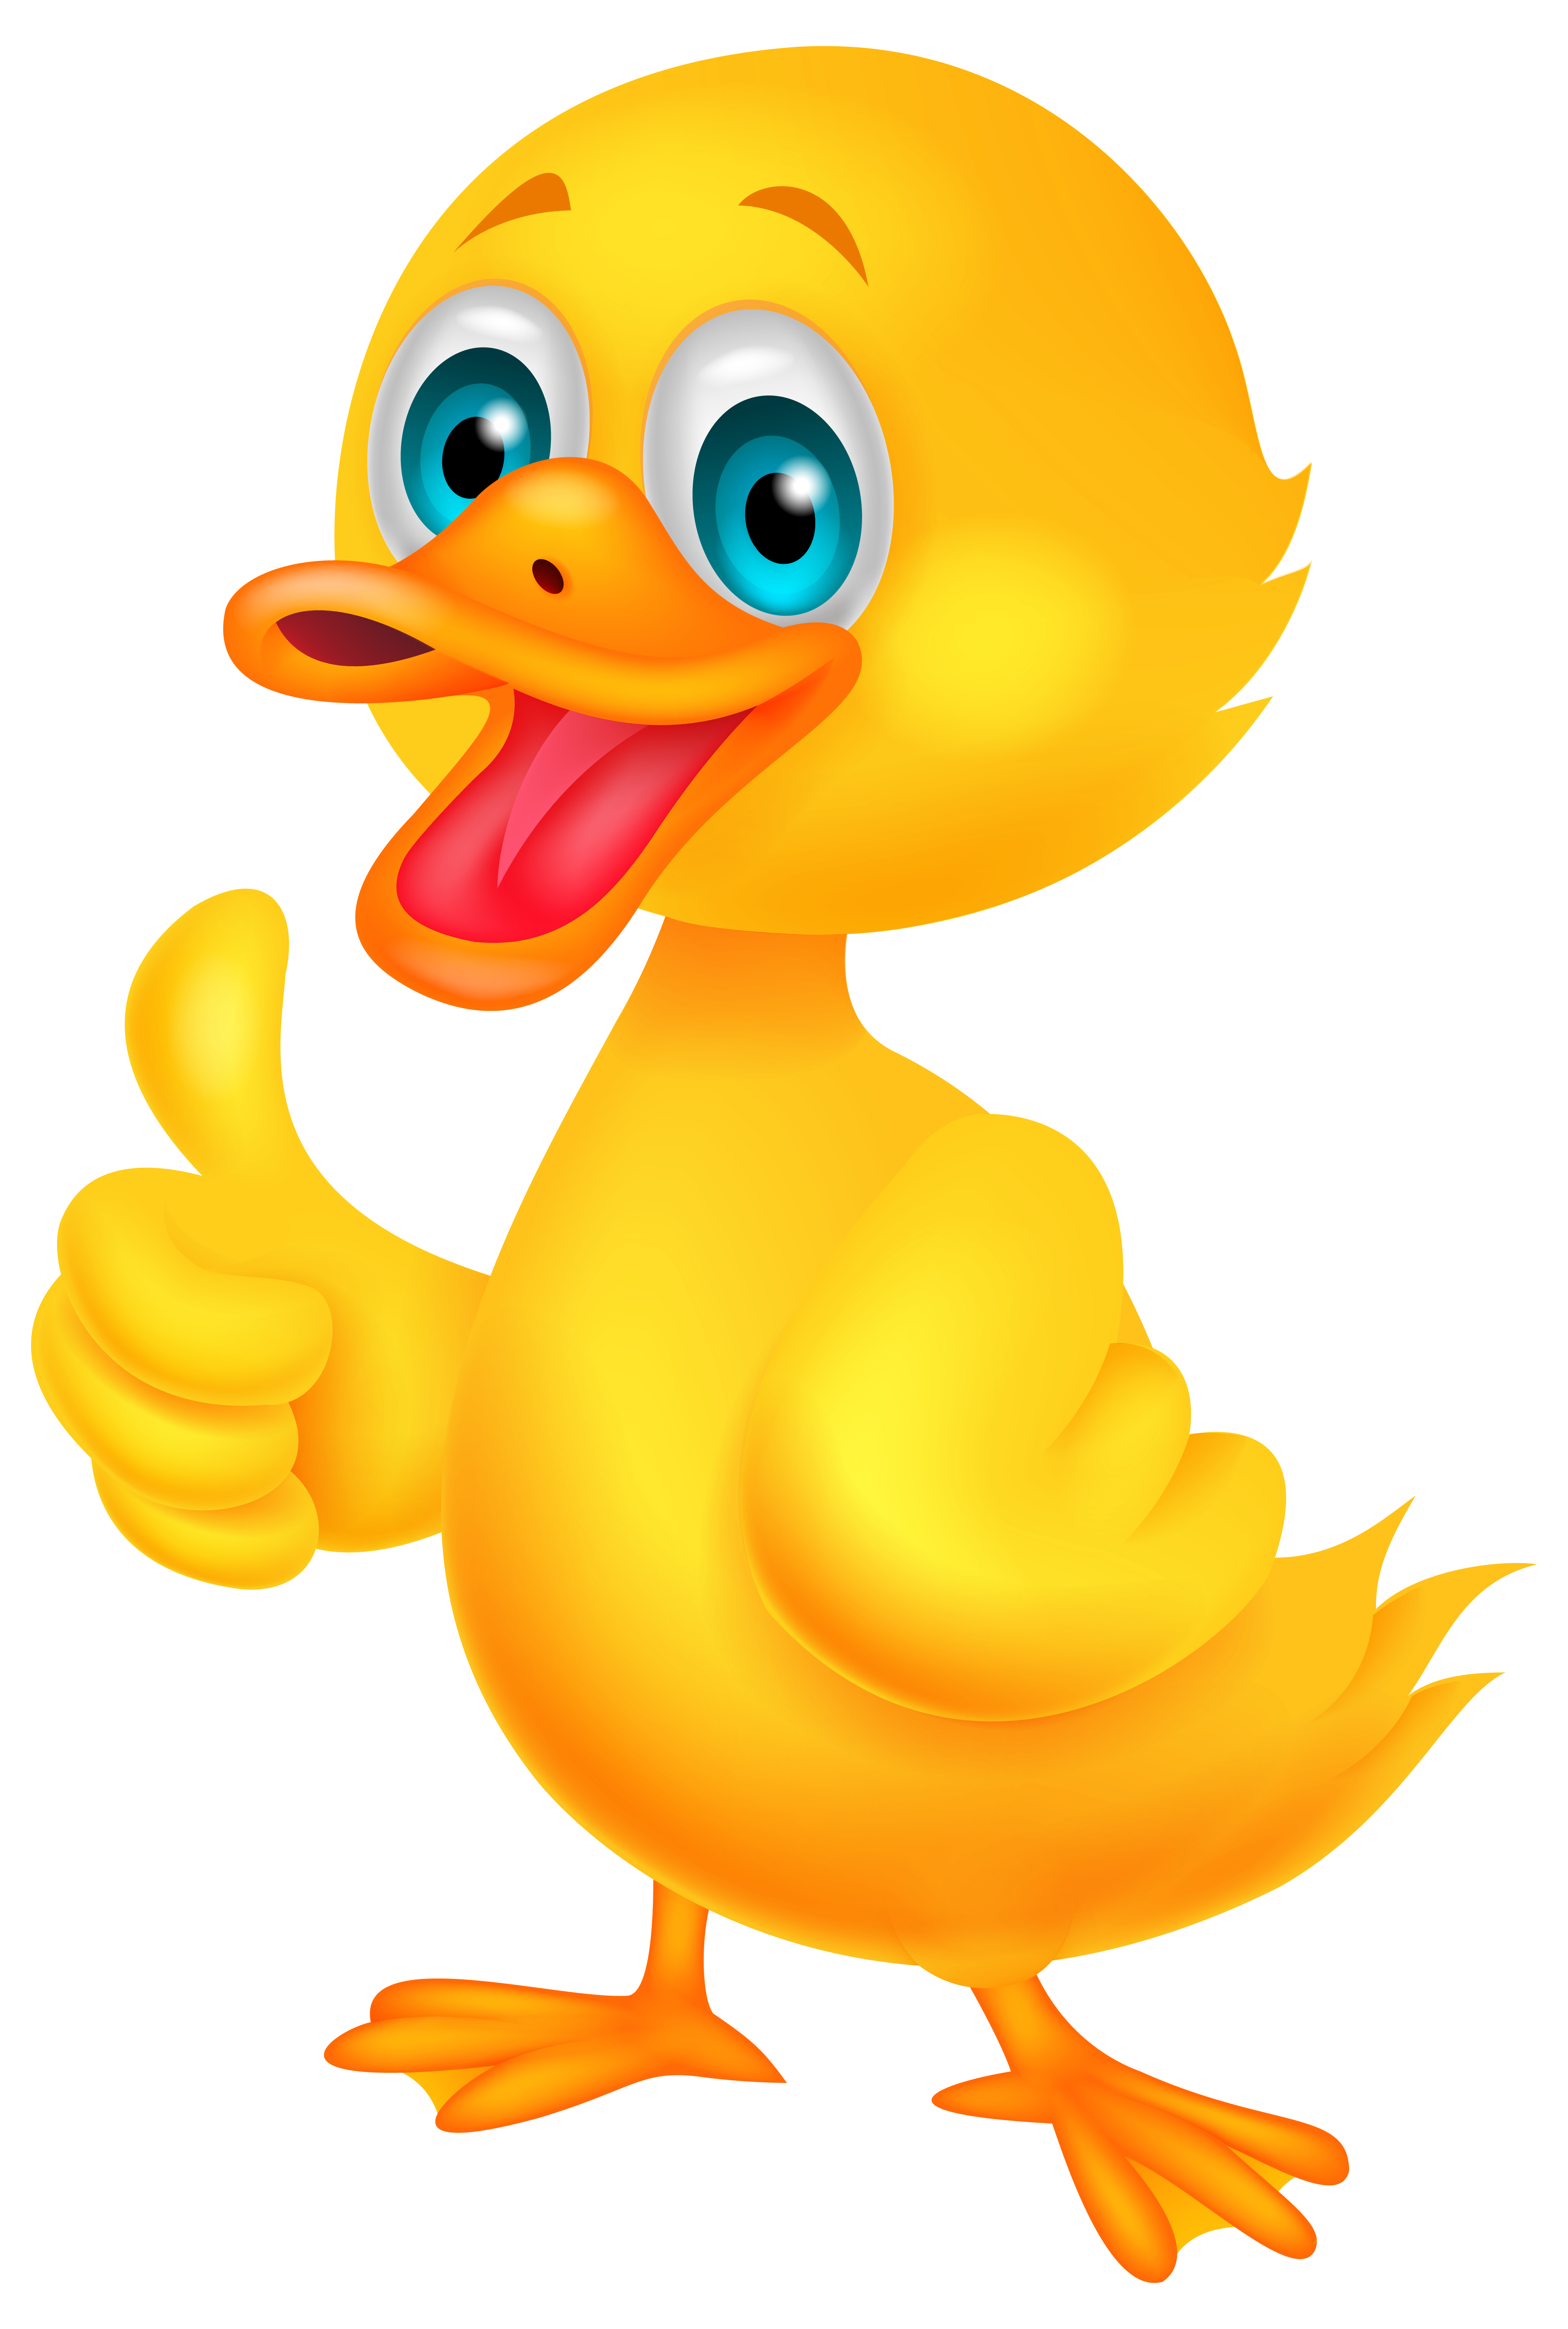 Little Duck PNG Clip Art Image | Gallery Yopriceville - High ...